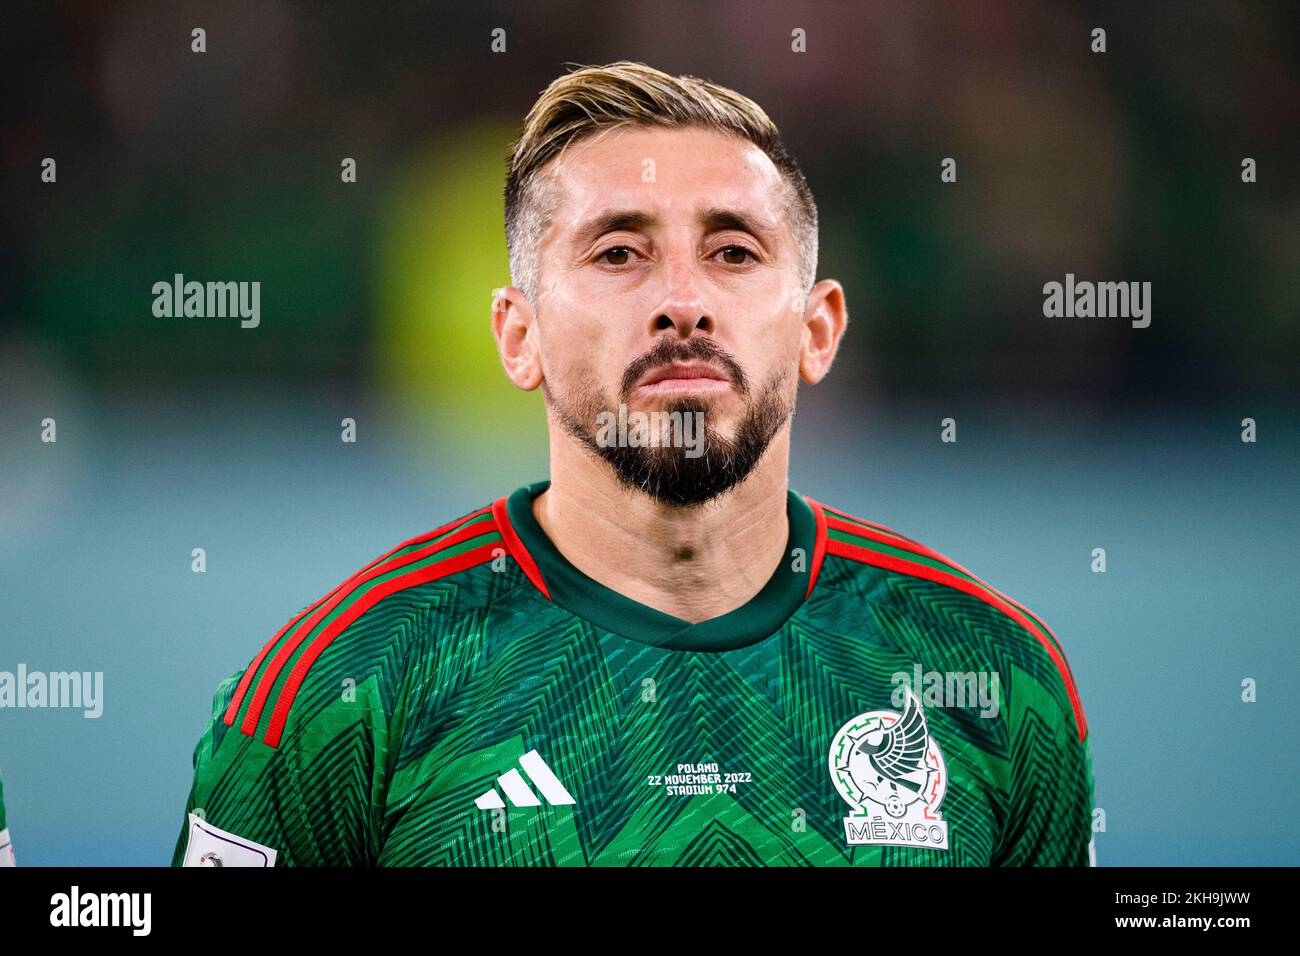 Doha, Qatar. 22nd Nov, 2022. Estadio 974 Portrait Hector Herrera of Mexico before the match between Mexico and Poland, valid for the group stage of the World Cup, held at Estadio 974 in Doha, Qatar. (Marcio Machado/SPP) Credit: SPP Sport Press Photo. /Alamy Live News Stock Photo